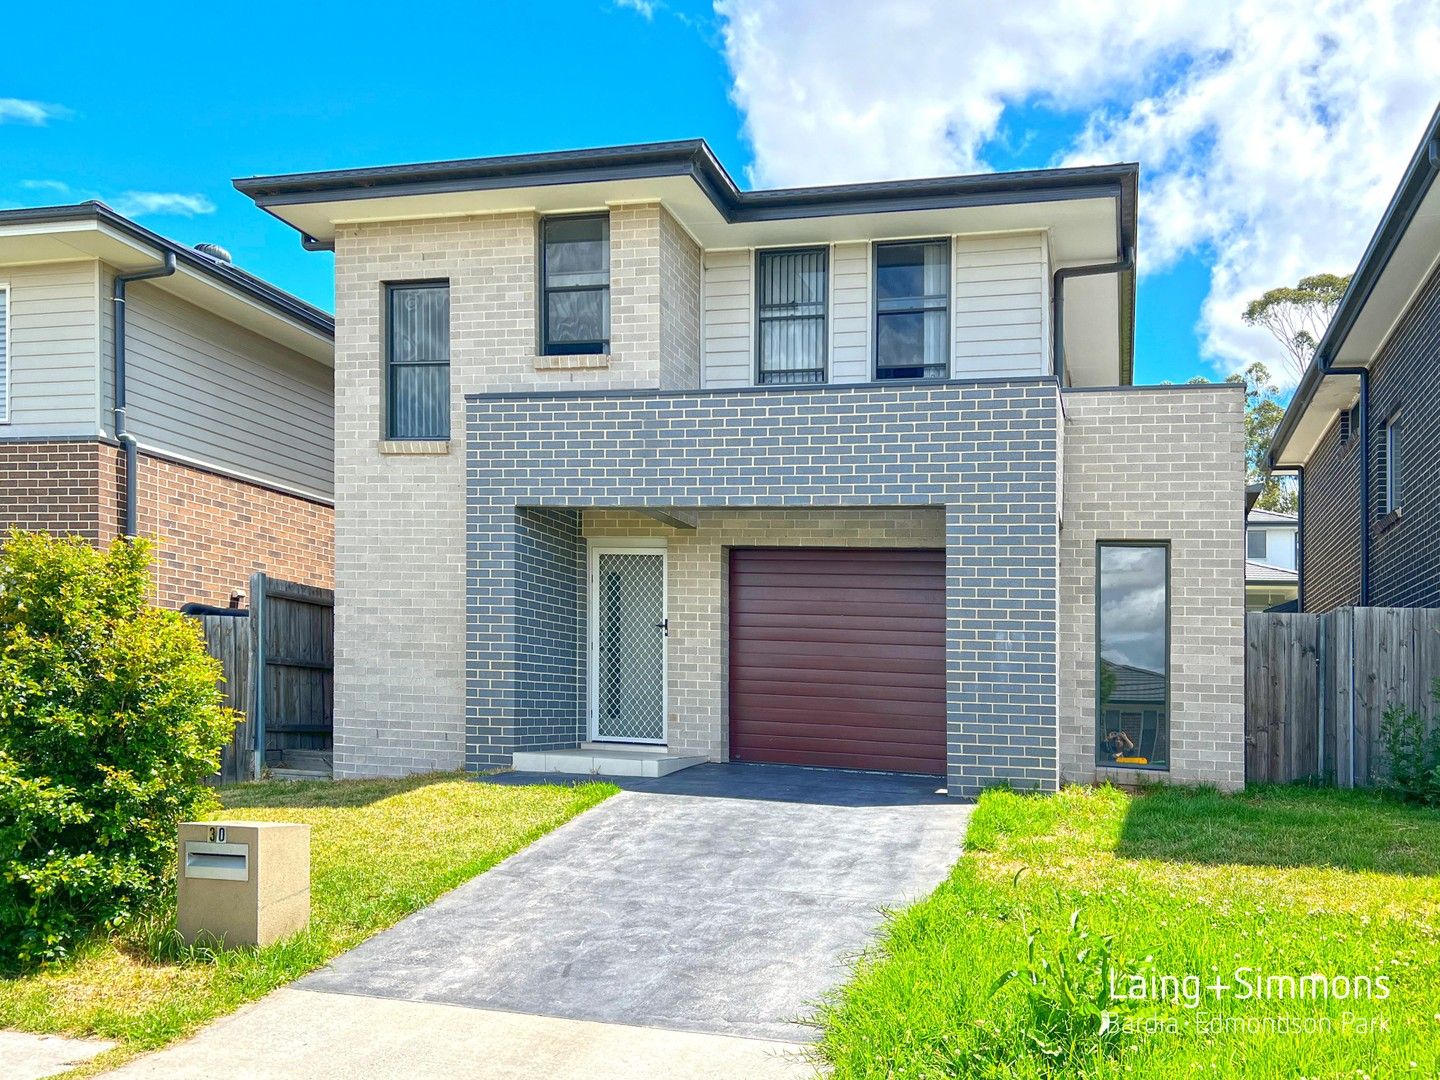 4 bedrooms House in 30 Propellor Avenue LEPPINGTON NSW, 2179